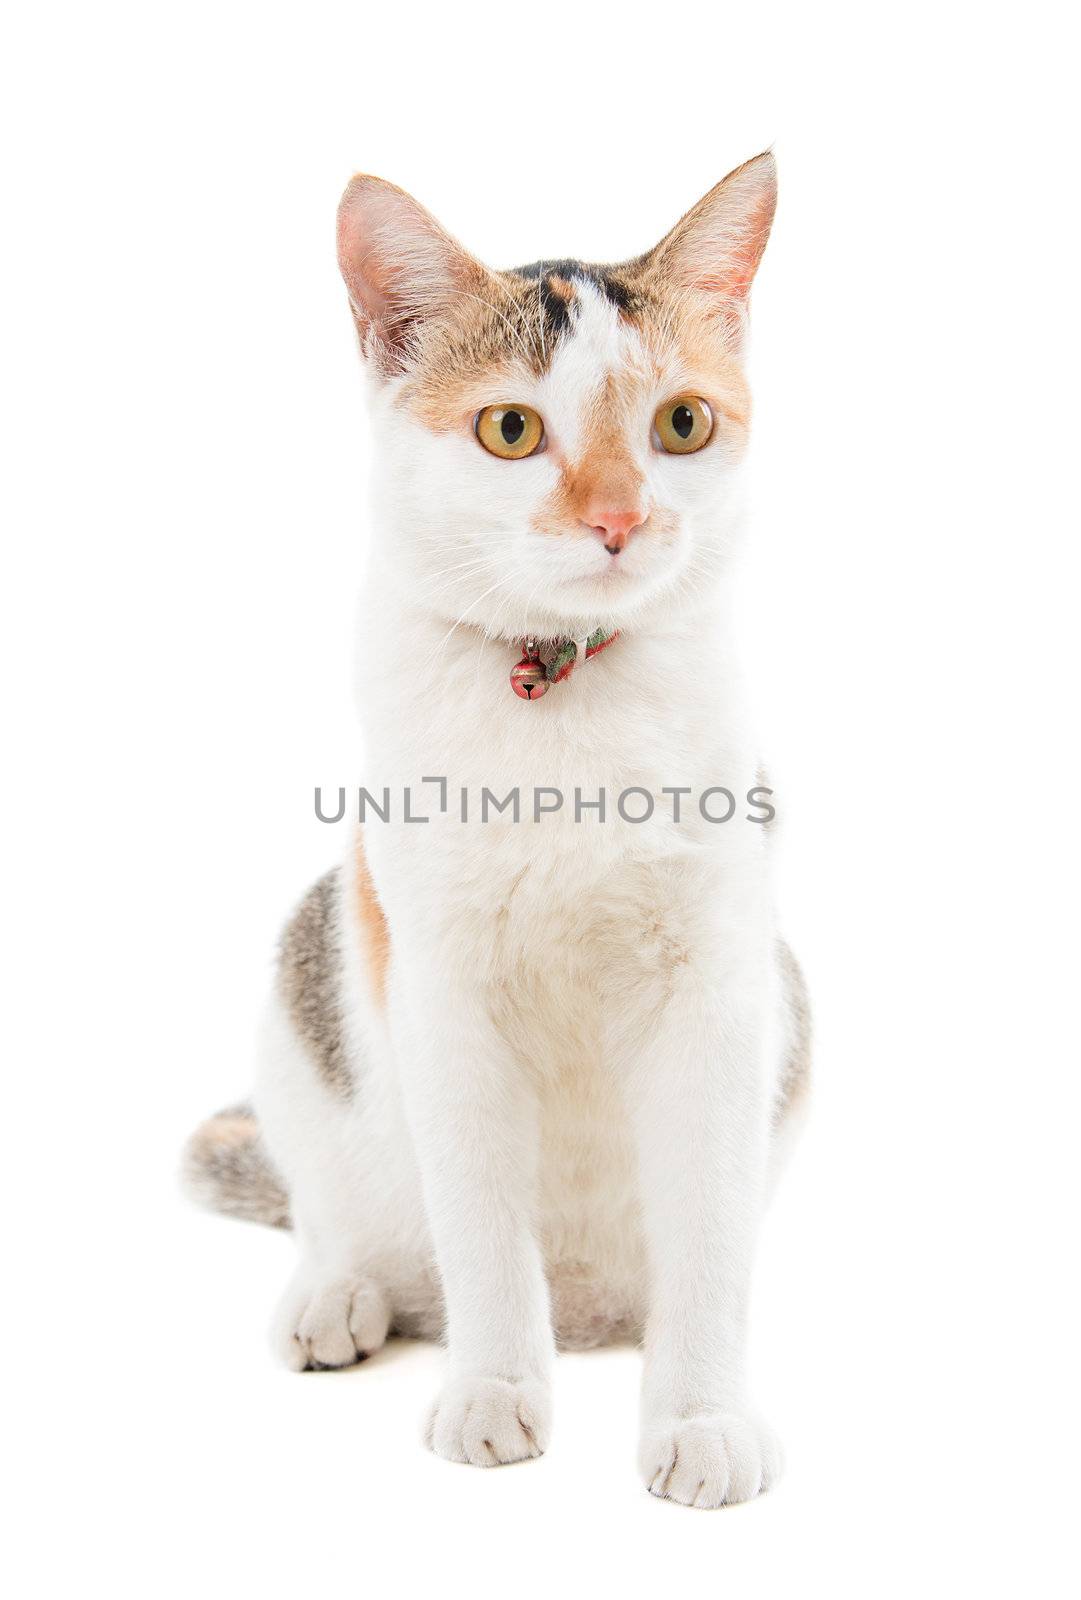 Malaysian short haired cat sitting on white background